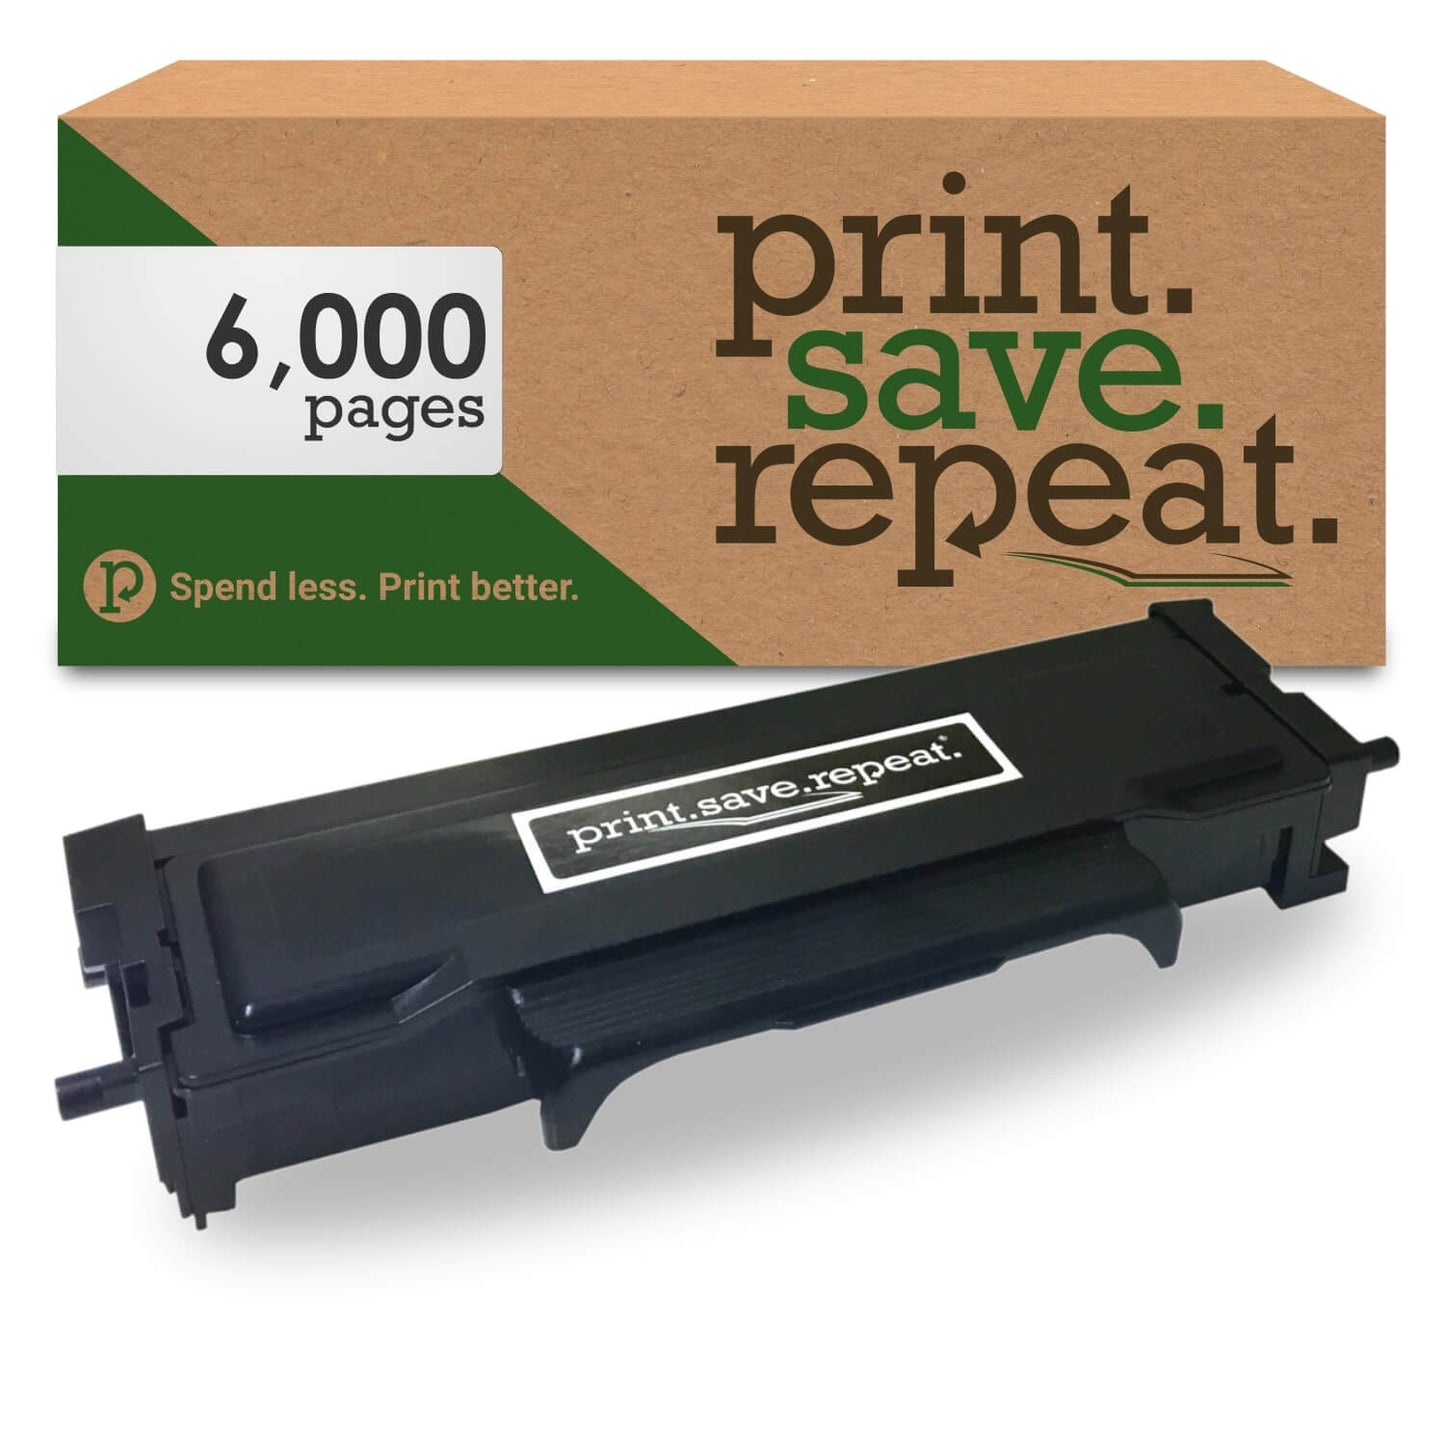 Print.Save.Repeat. Lexmark B221X00 Extra High Yield Toner Cartridge for B2236, MB2236 [6,000 Pages]